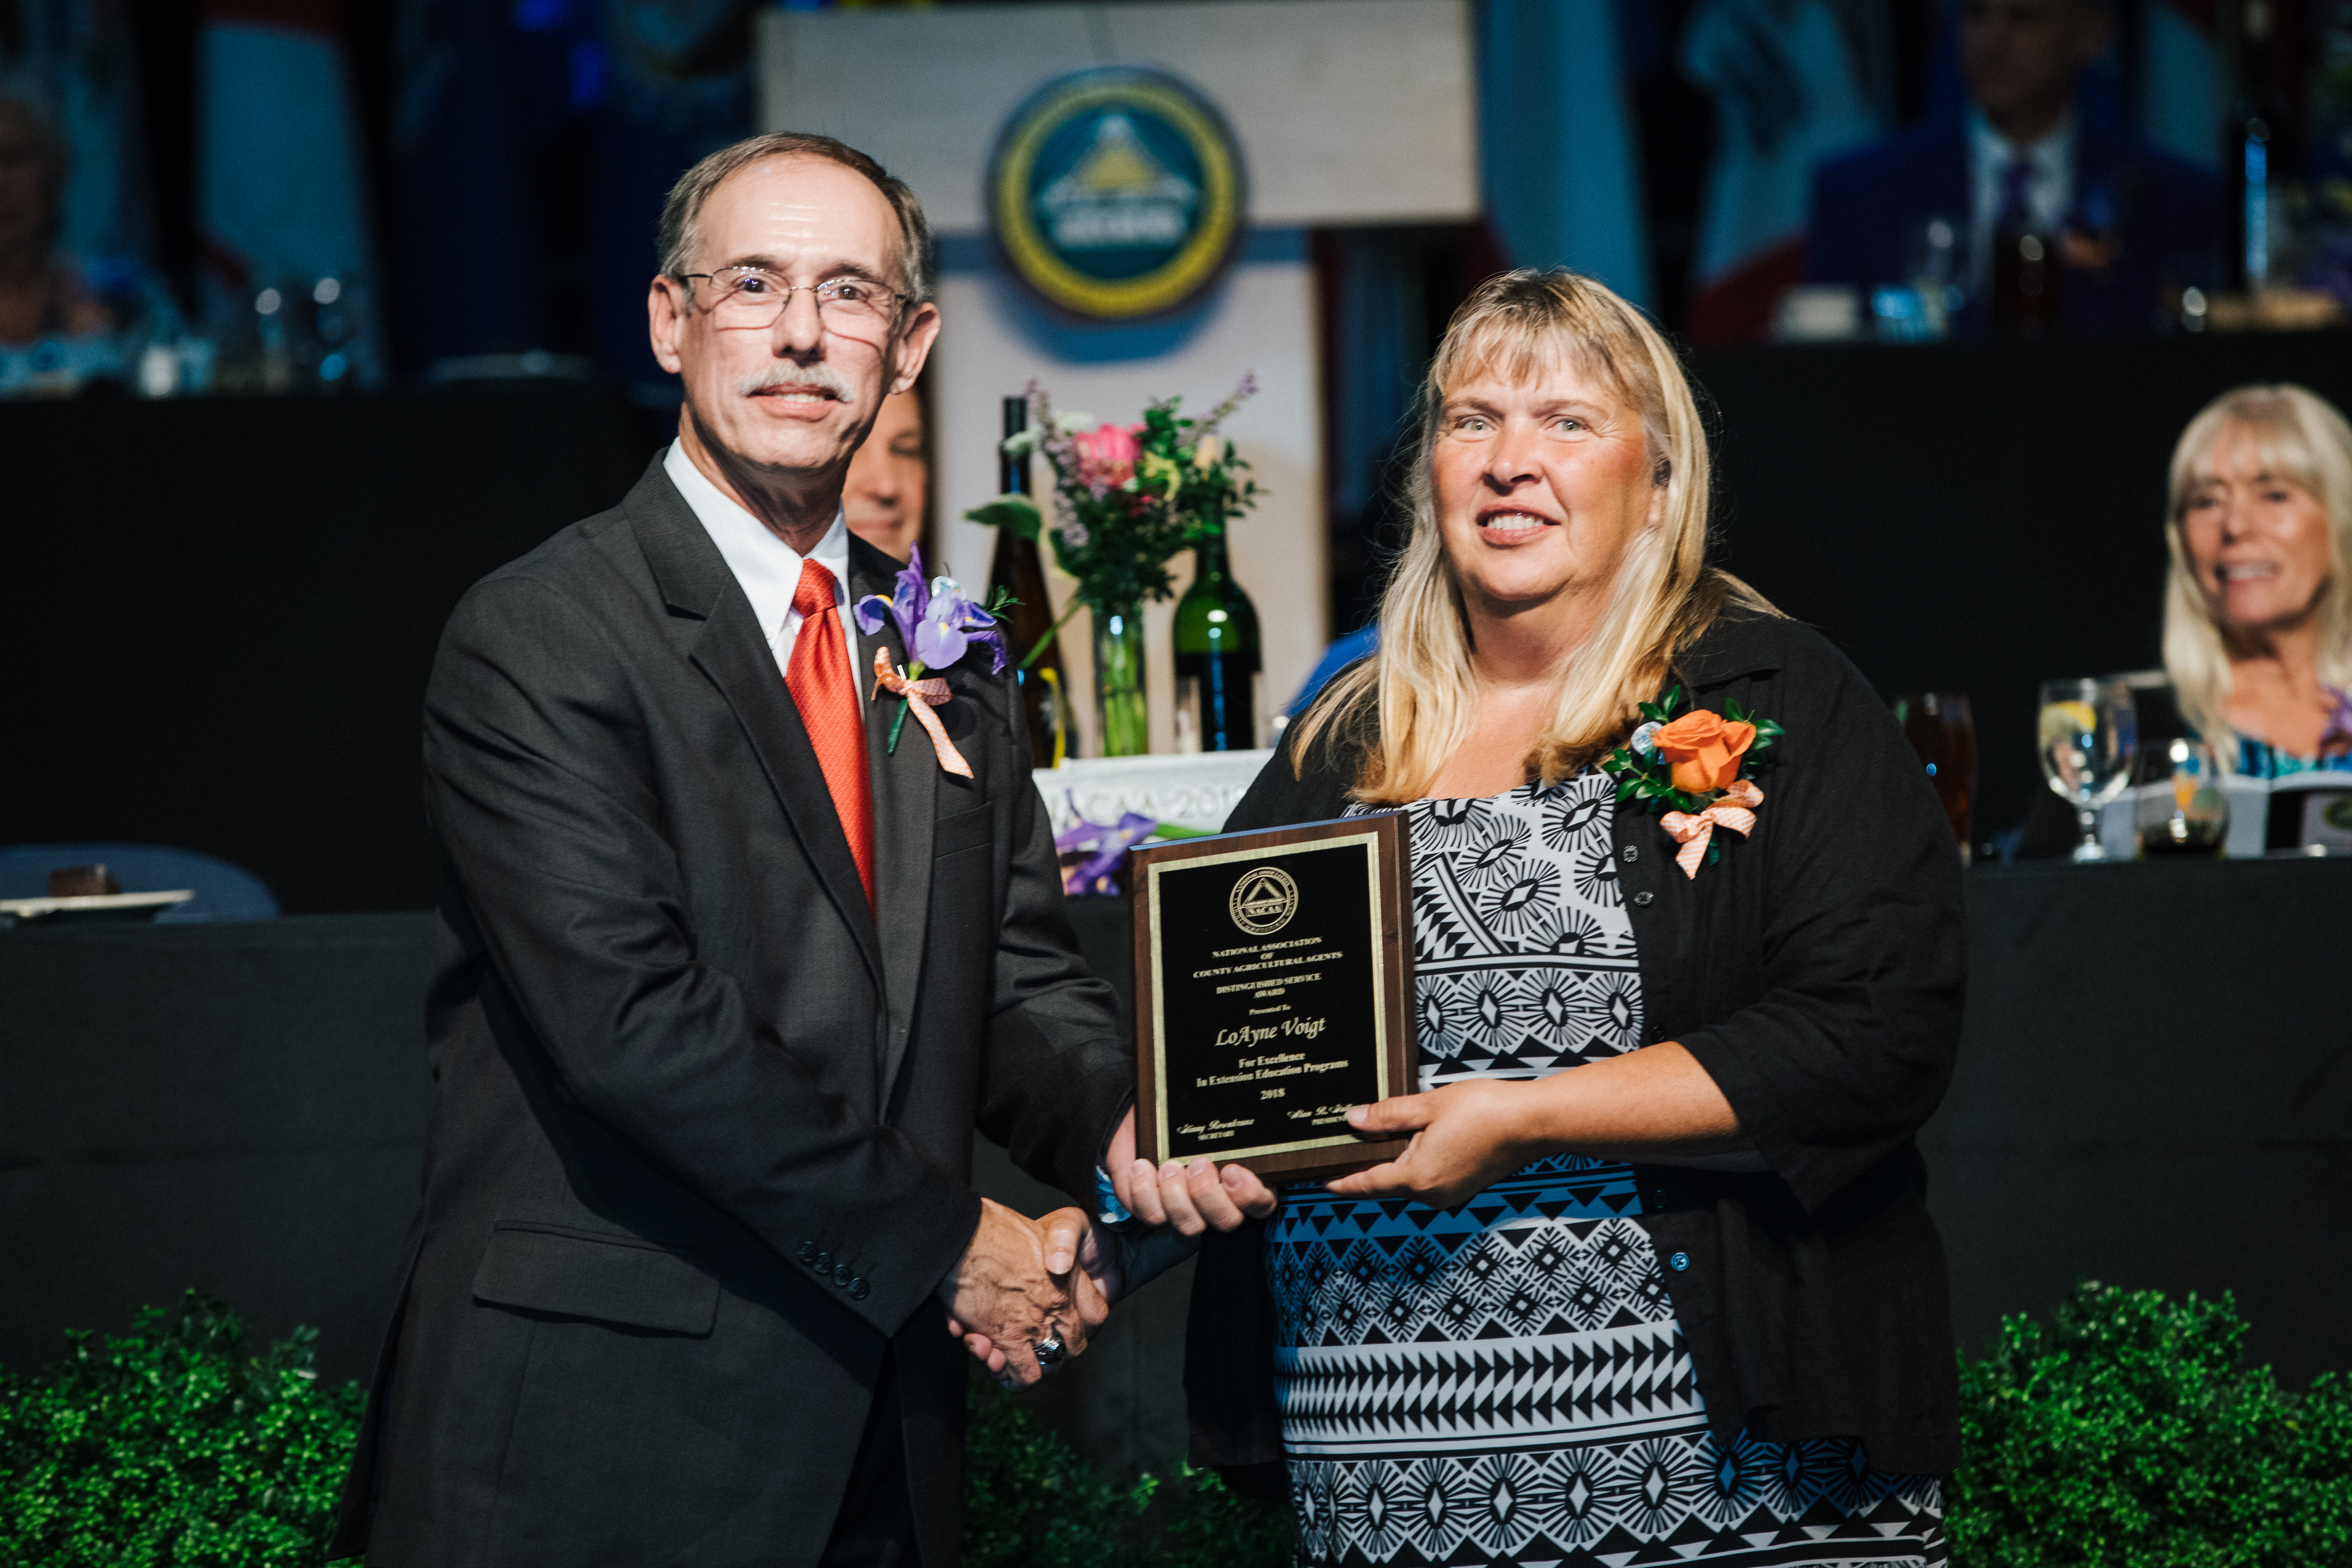 LoAyne Voigt, NDSU Extension agriculture and natural resources agent in Renville County, receives the Distinguished Service Award from Alan Galloway, president of the National Association of County Agricultural Agents. (Photo courtesy of NACAA)